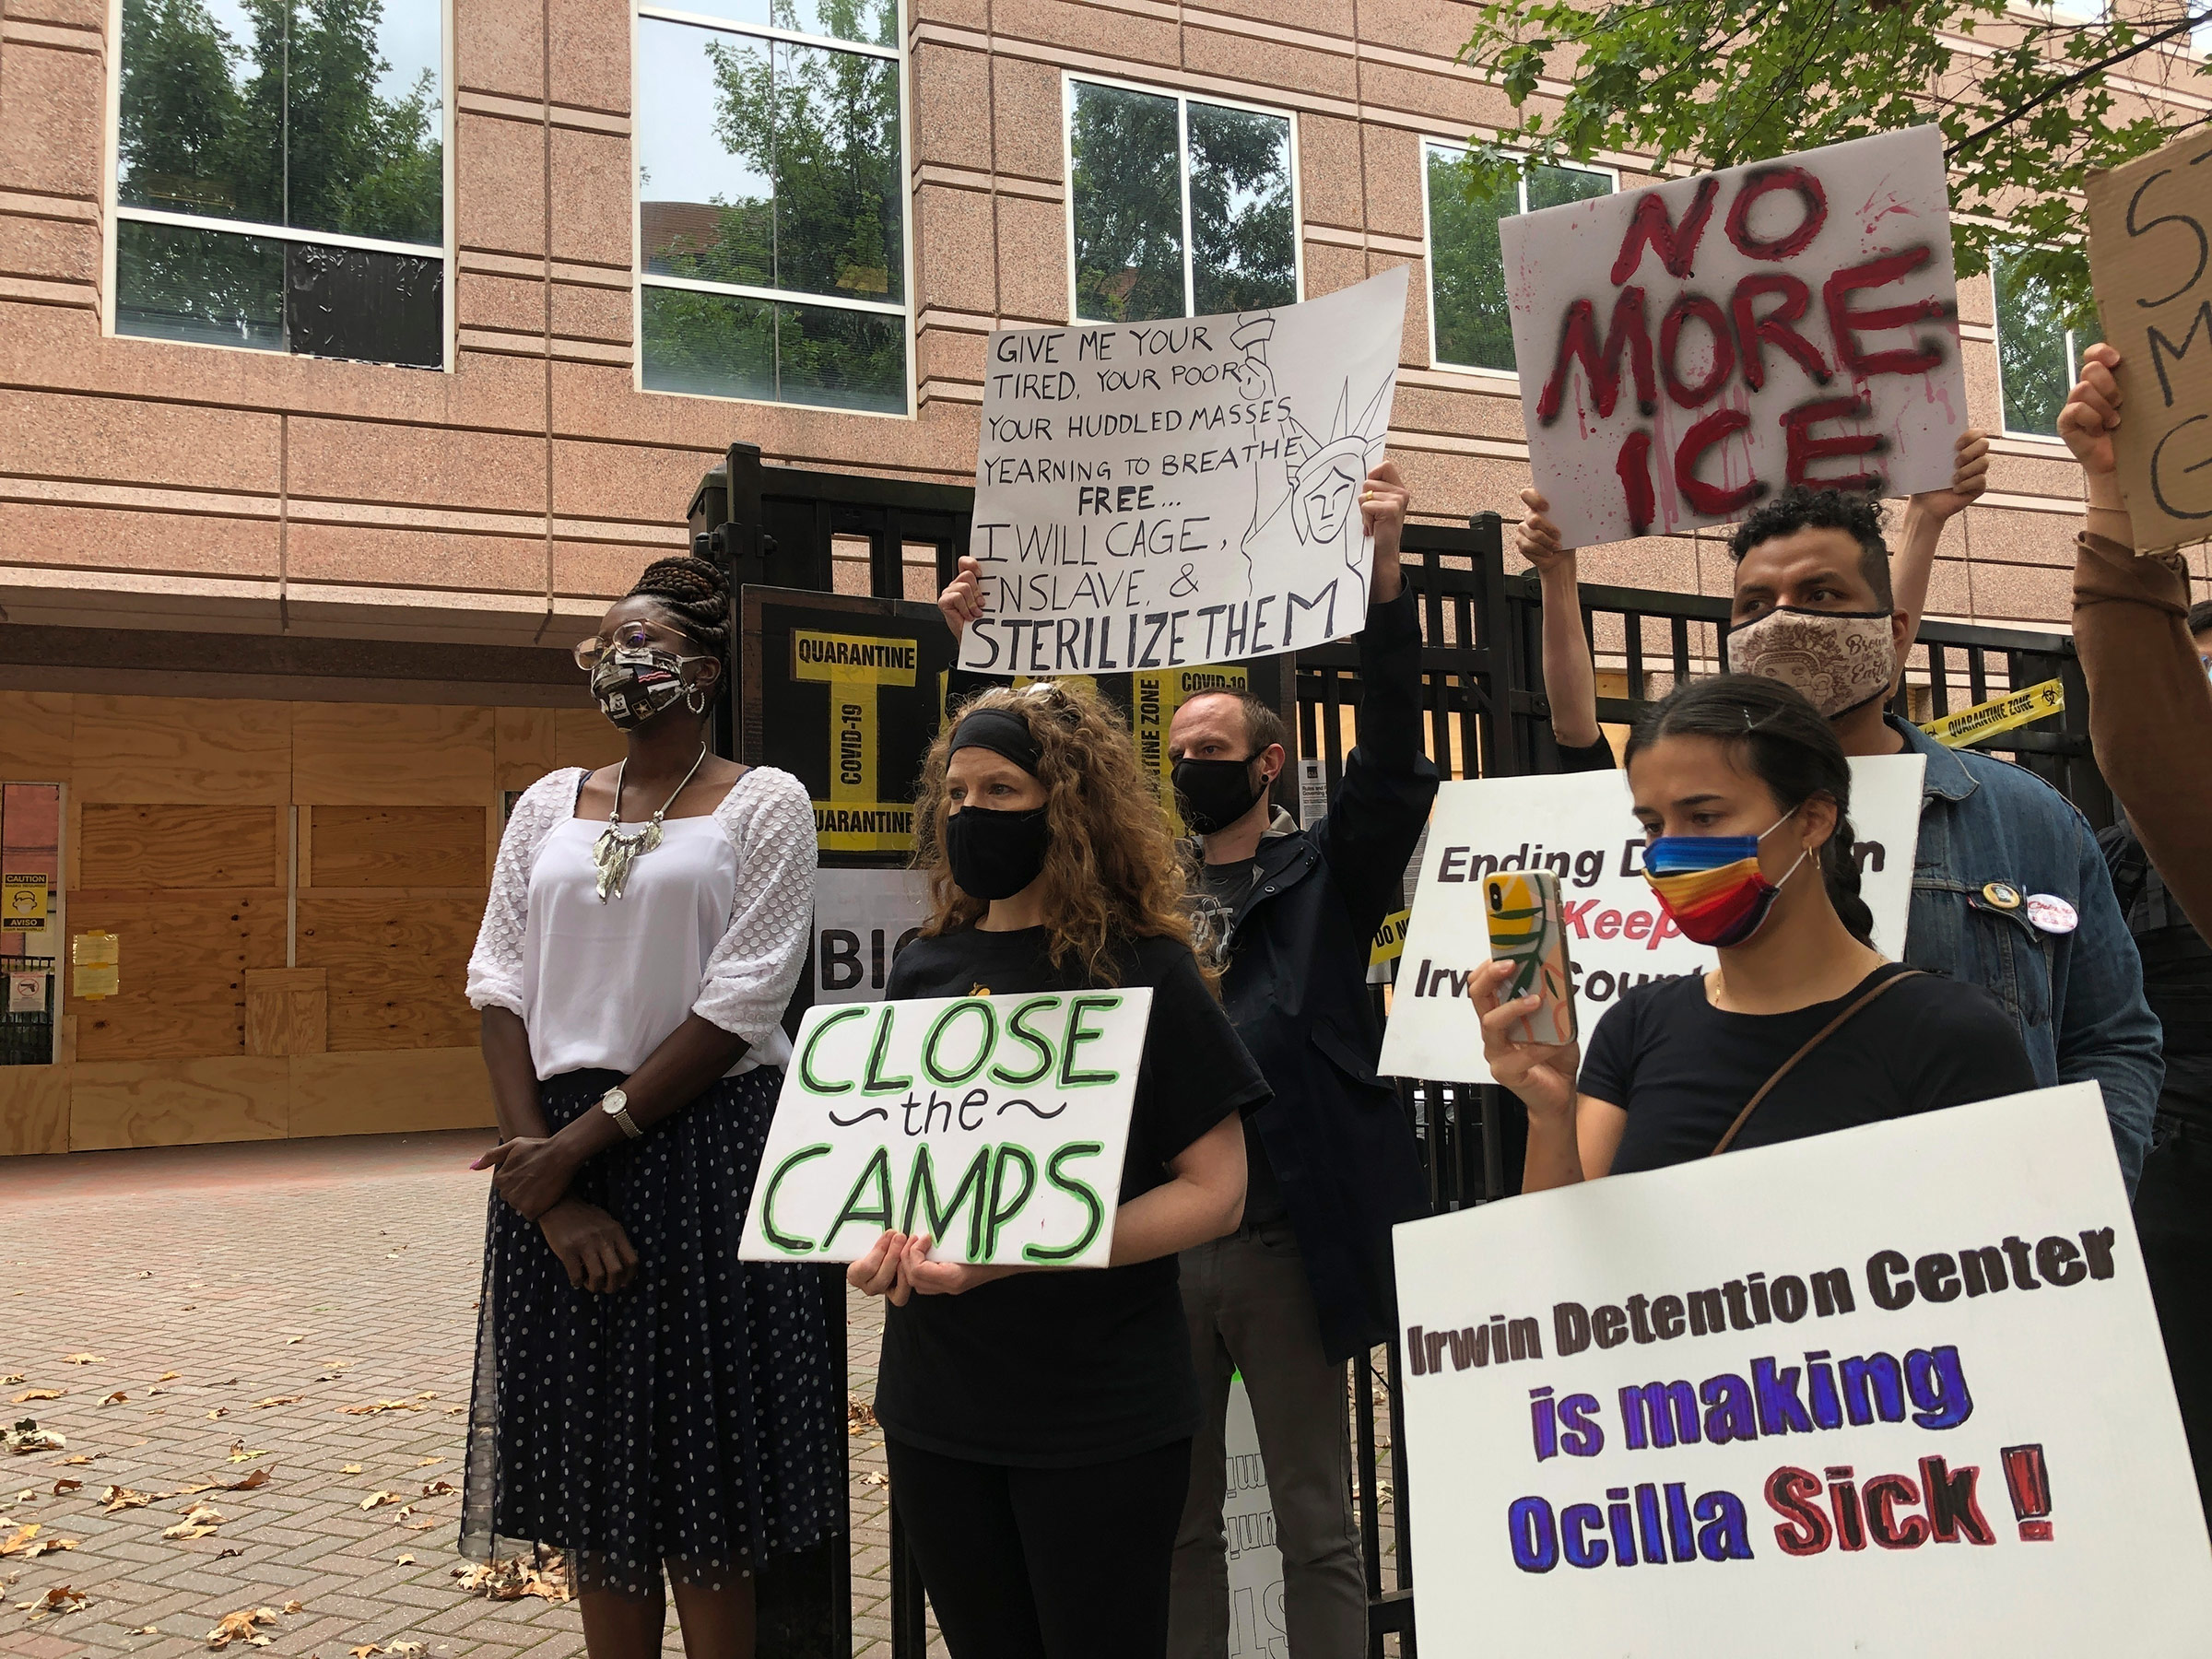 Dawn Wooten, left, a nurse at Irwin County Detention Center in Ocilla, Ga., speaks at a news conference in Atlanta protesting conditions at the immigration jail, on Sept. 15.